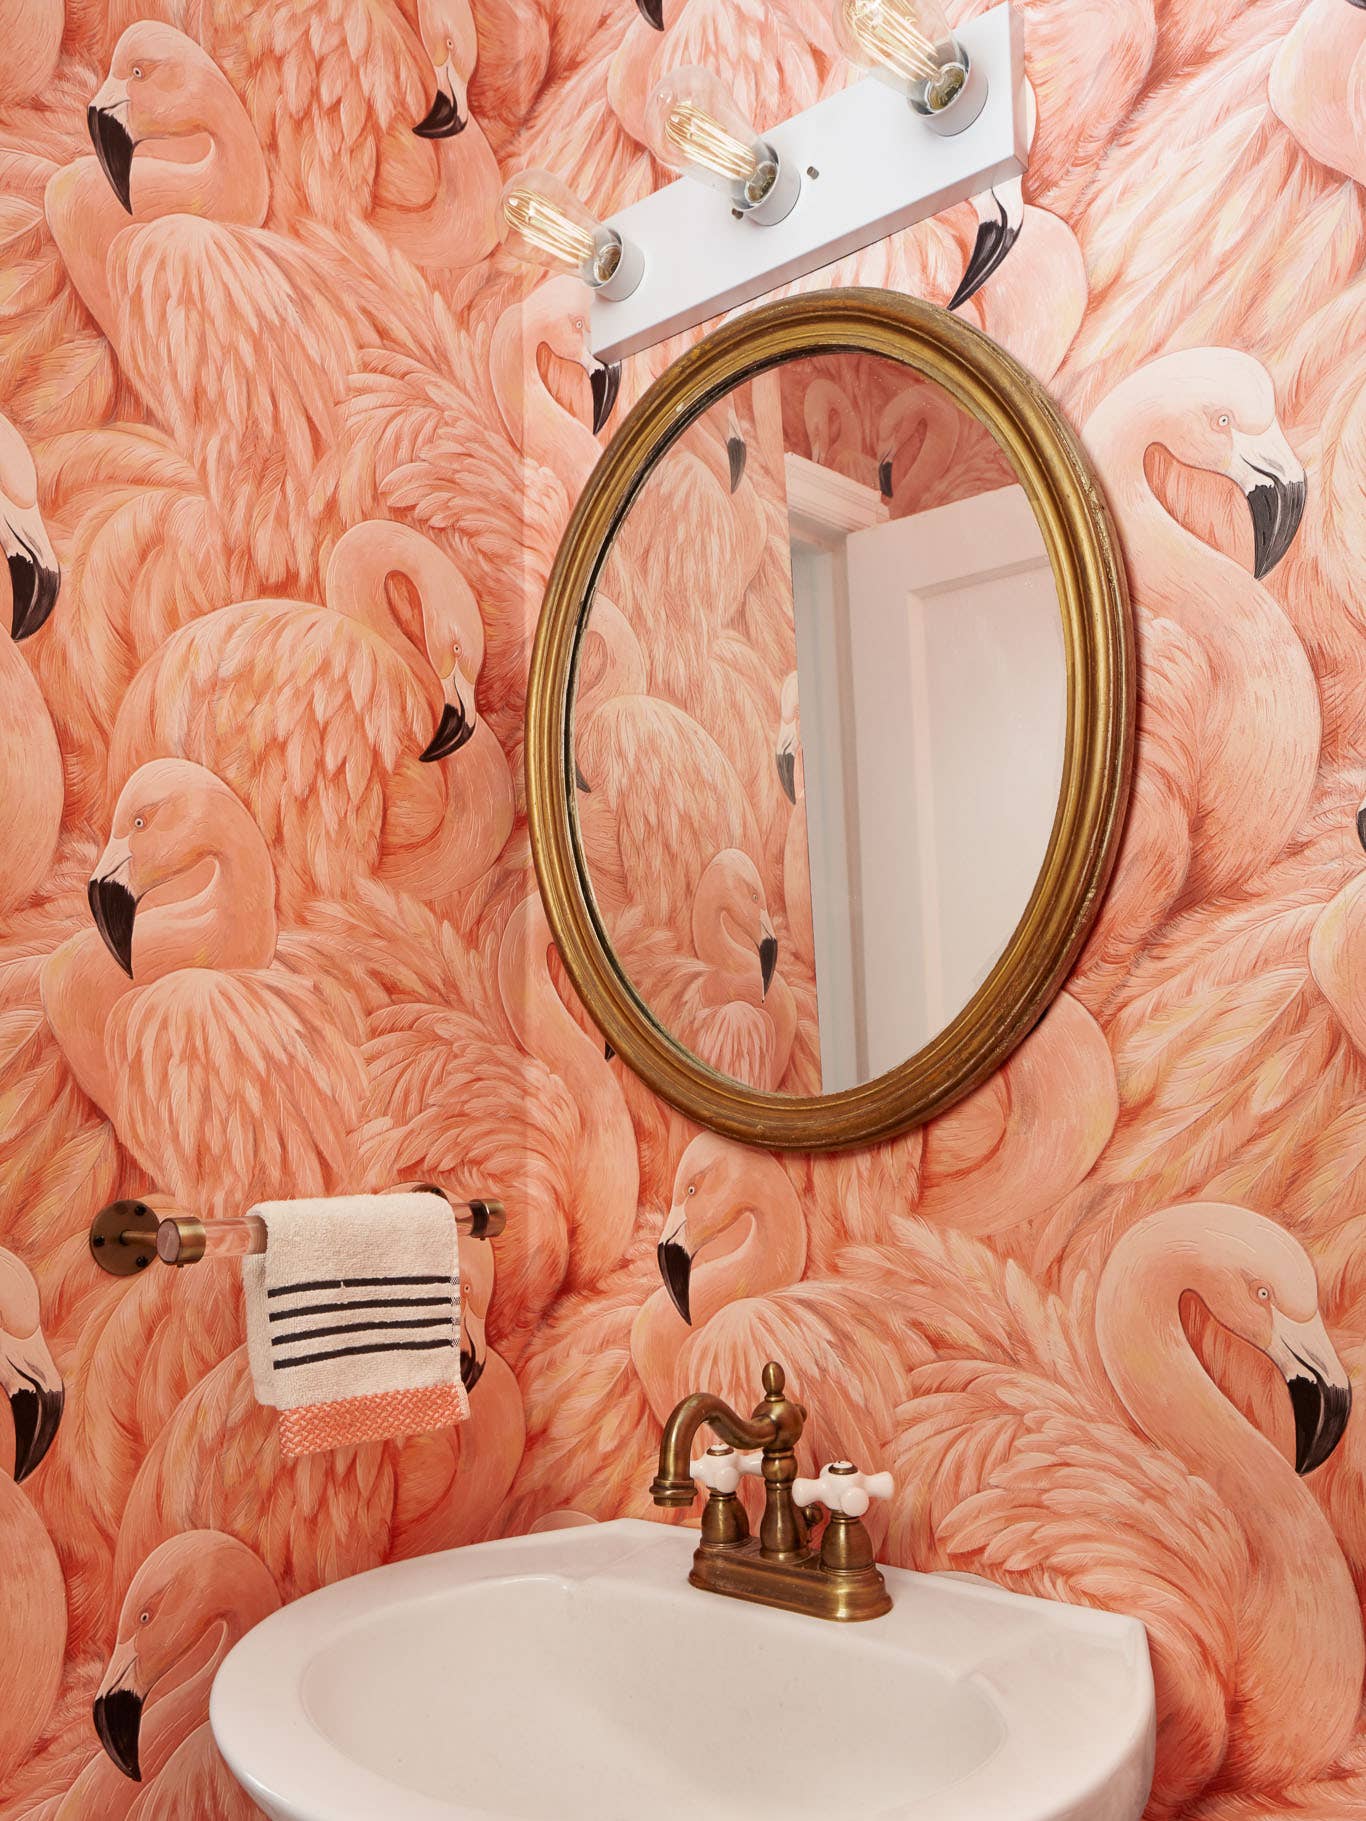 Take a Walk on the Wild Side With These Animal-Print Wallpapers